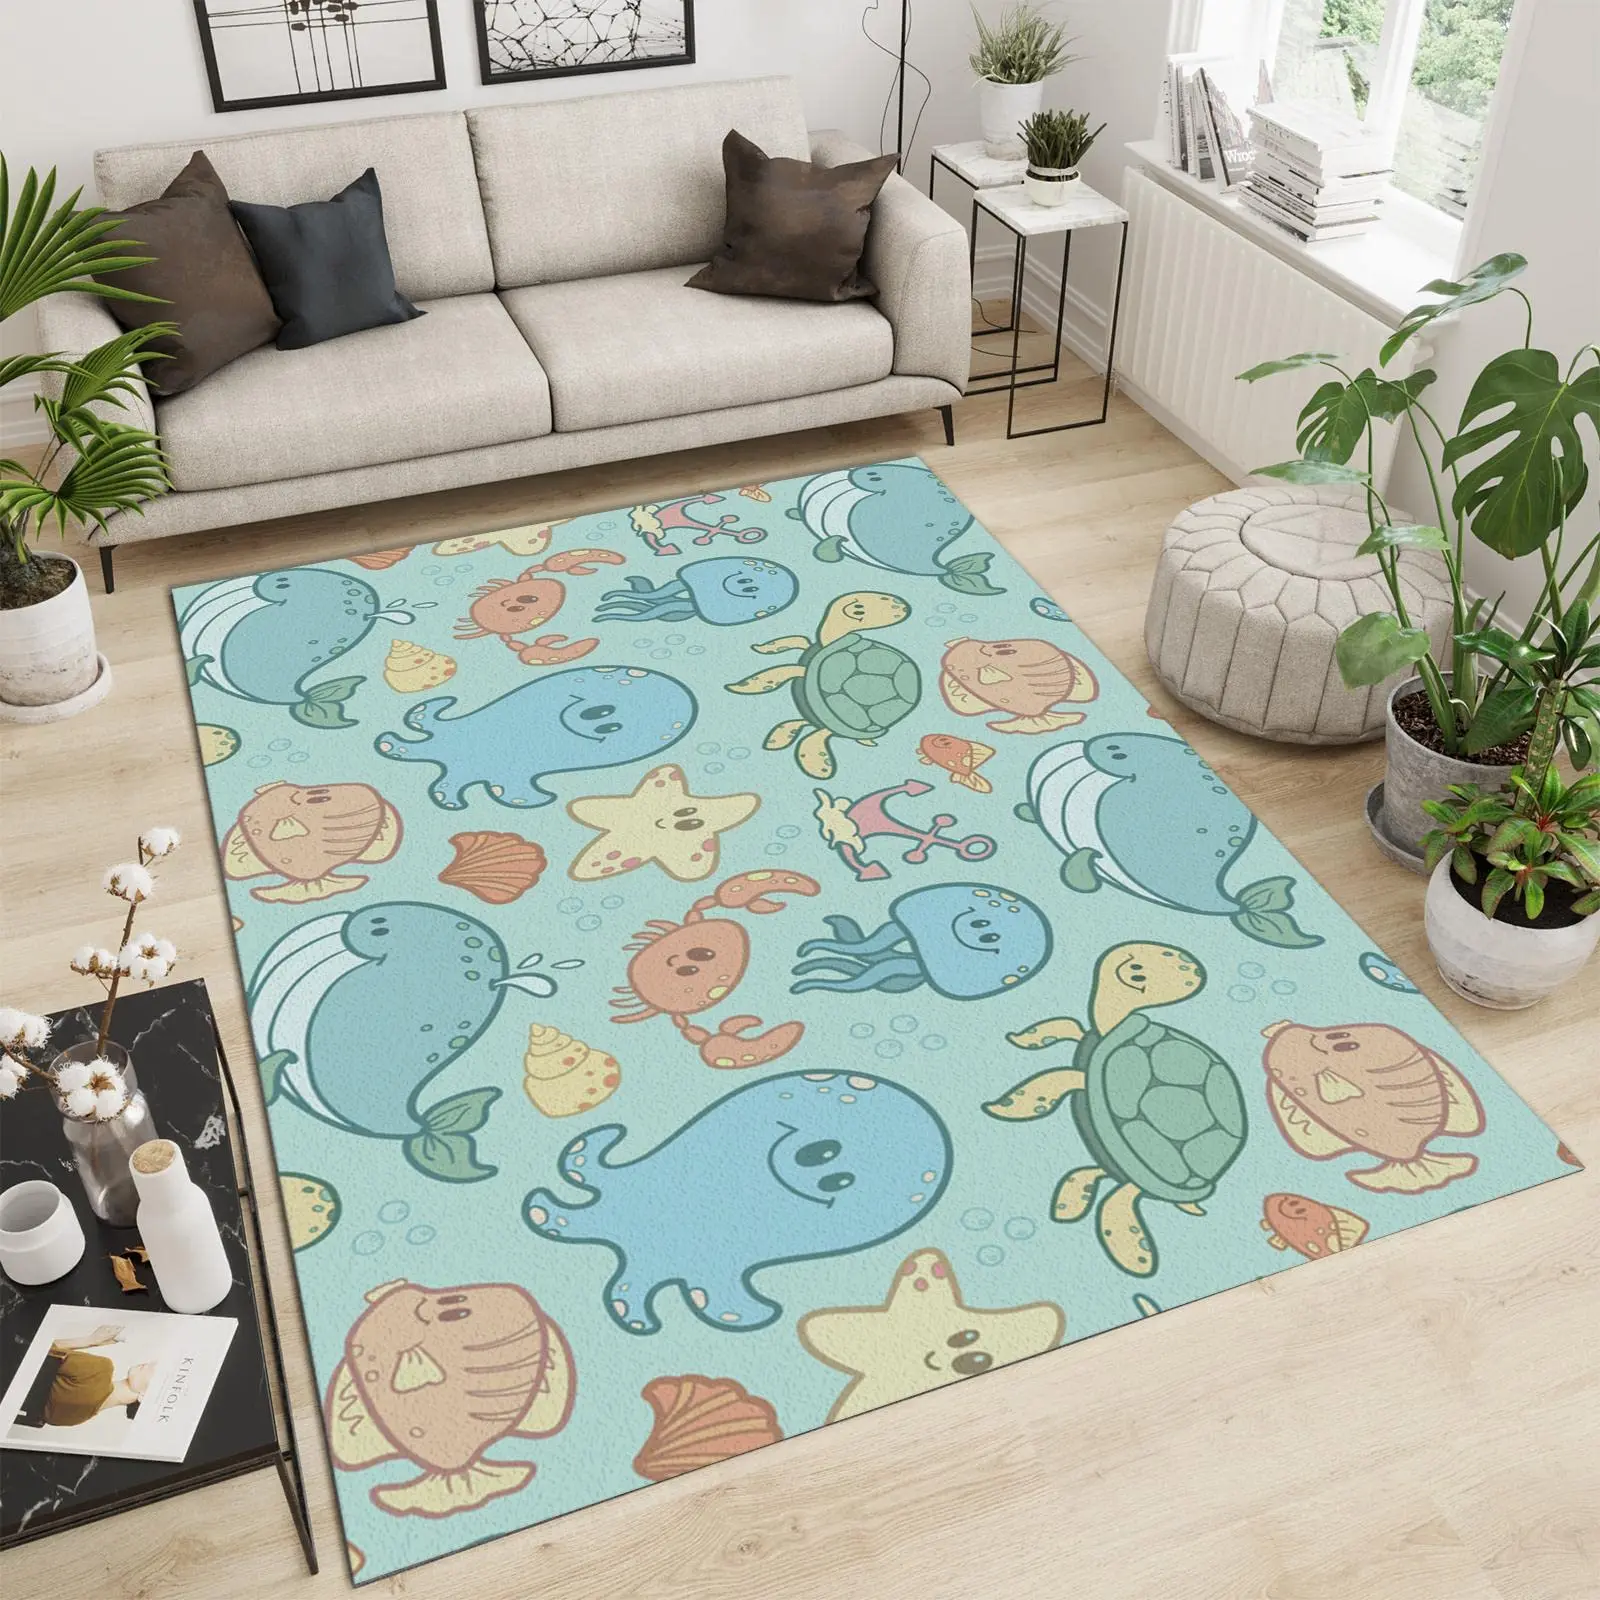 

HX Fashion Carpets Funng Cute Marine Organism Printed Areas Rugs Flannel Material Mats for Living Room Bedroom Dropshipping